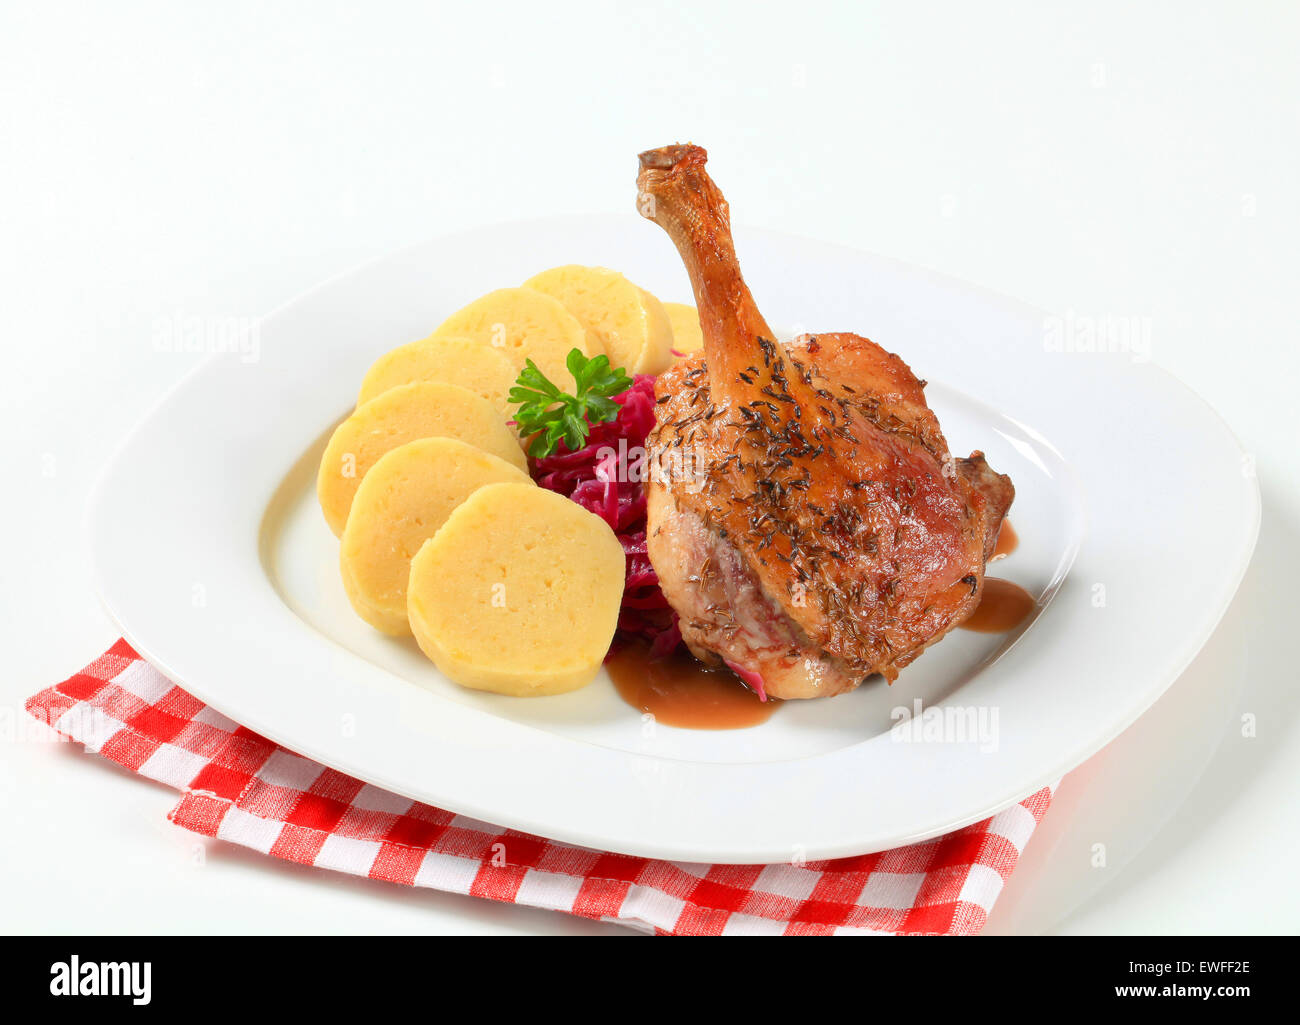 Dish of roast duck leg with potato dumplings and red cabbage Stock Photo